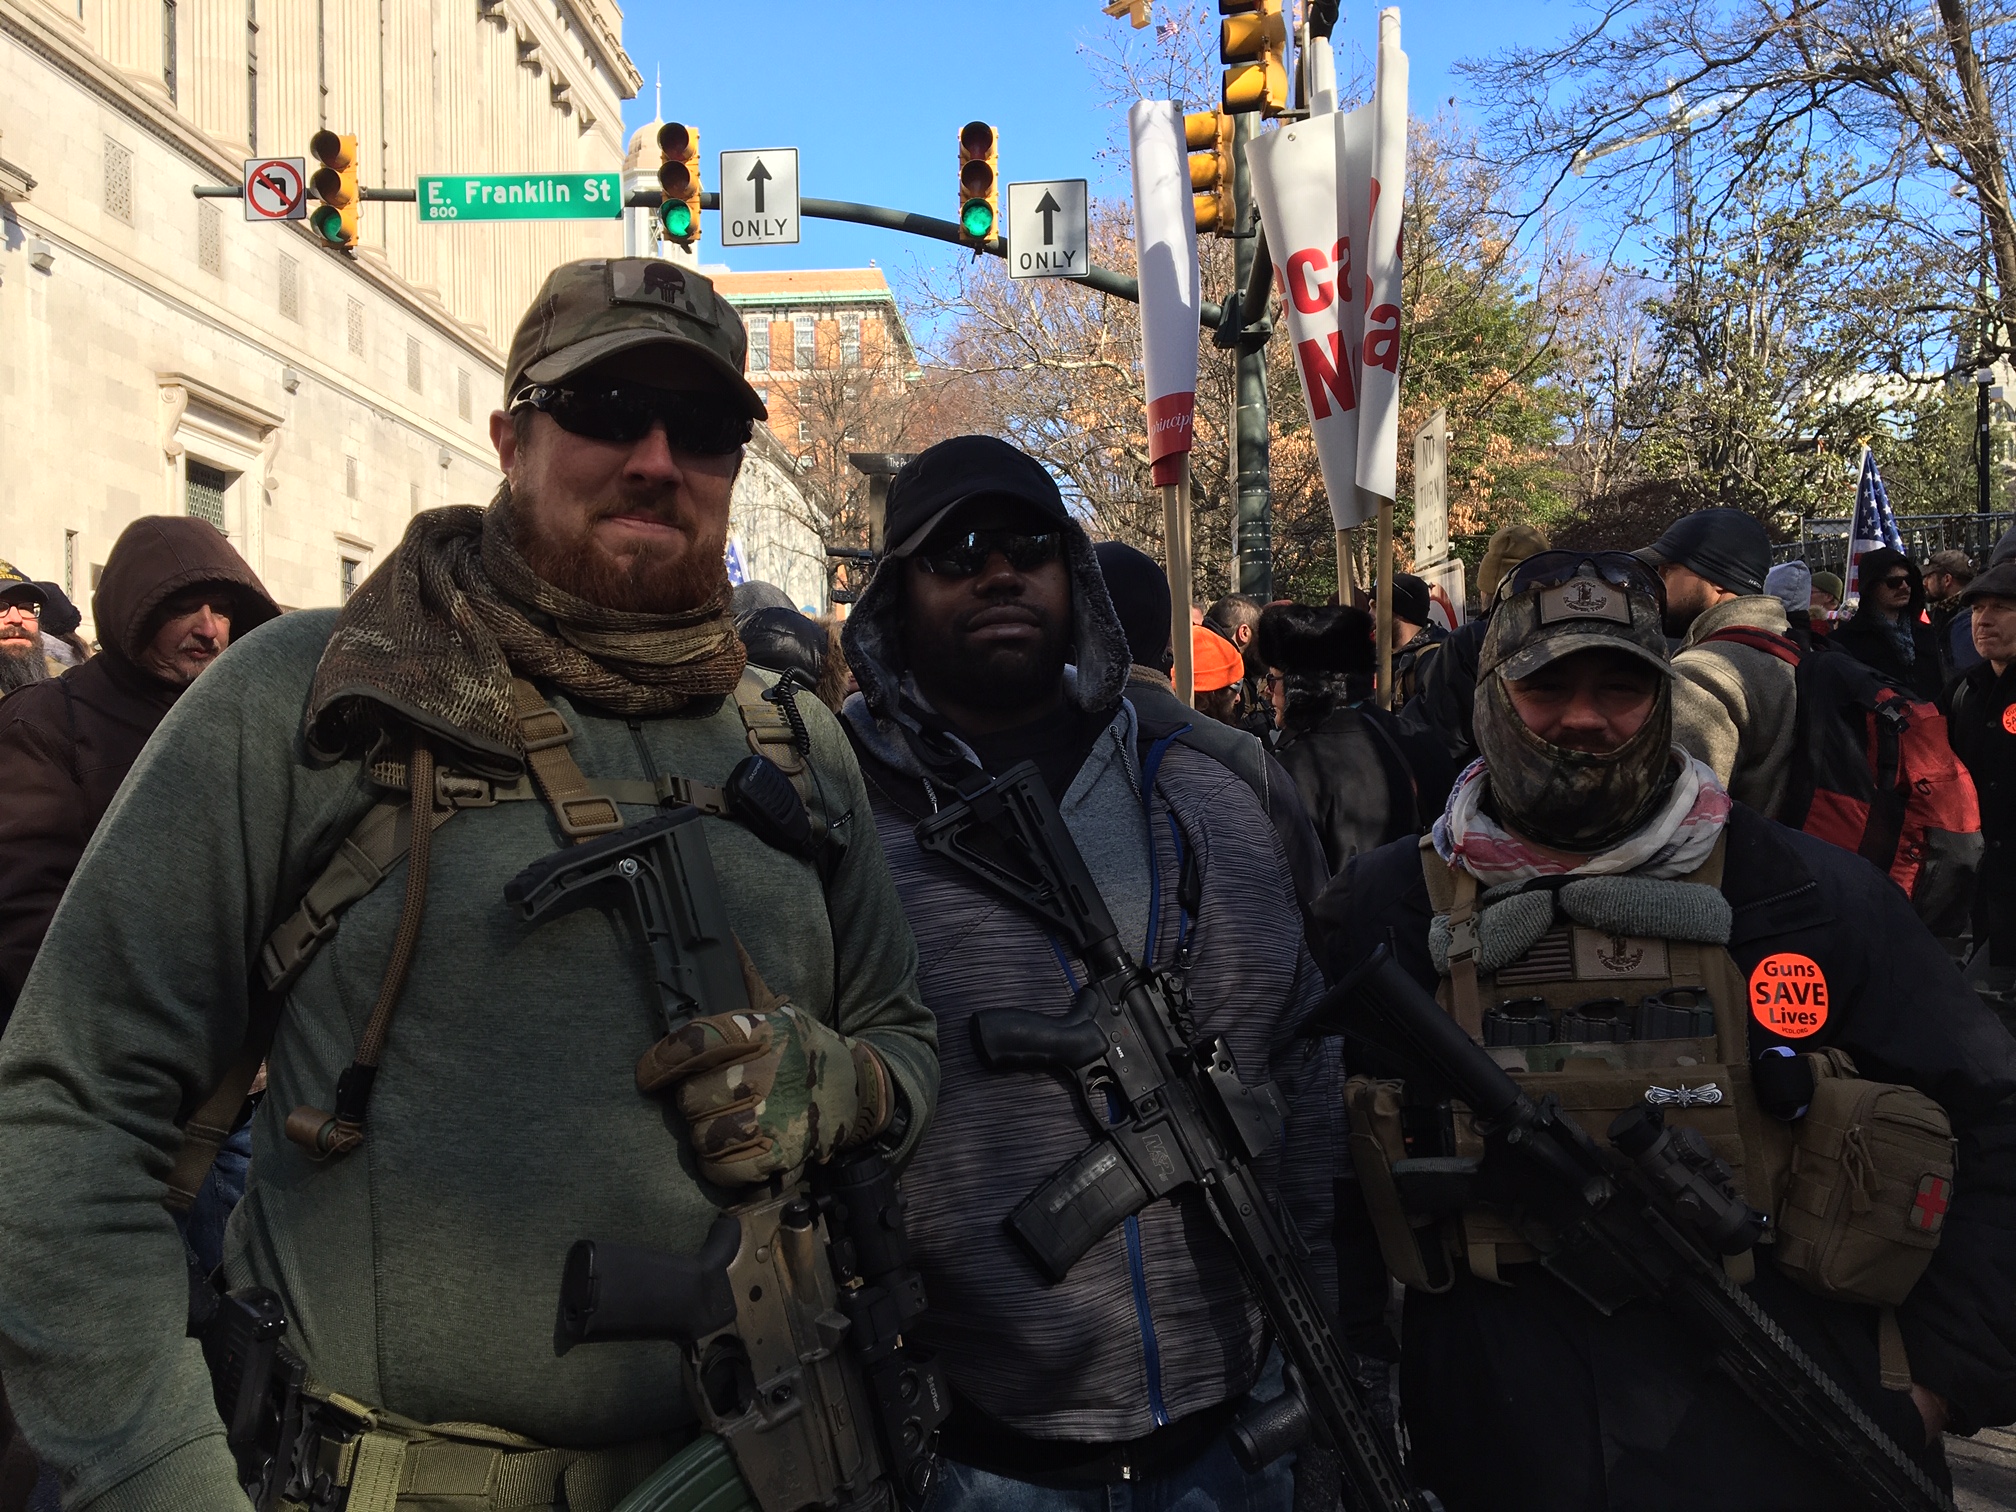 Virginia native Chad Barrett with other protesters in his group during Richmond's pro-gun rally (MEE/Sheren Khalel)